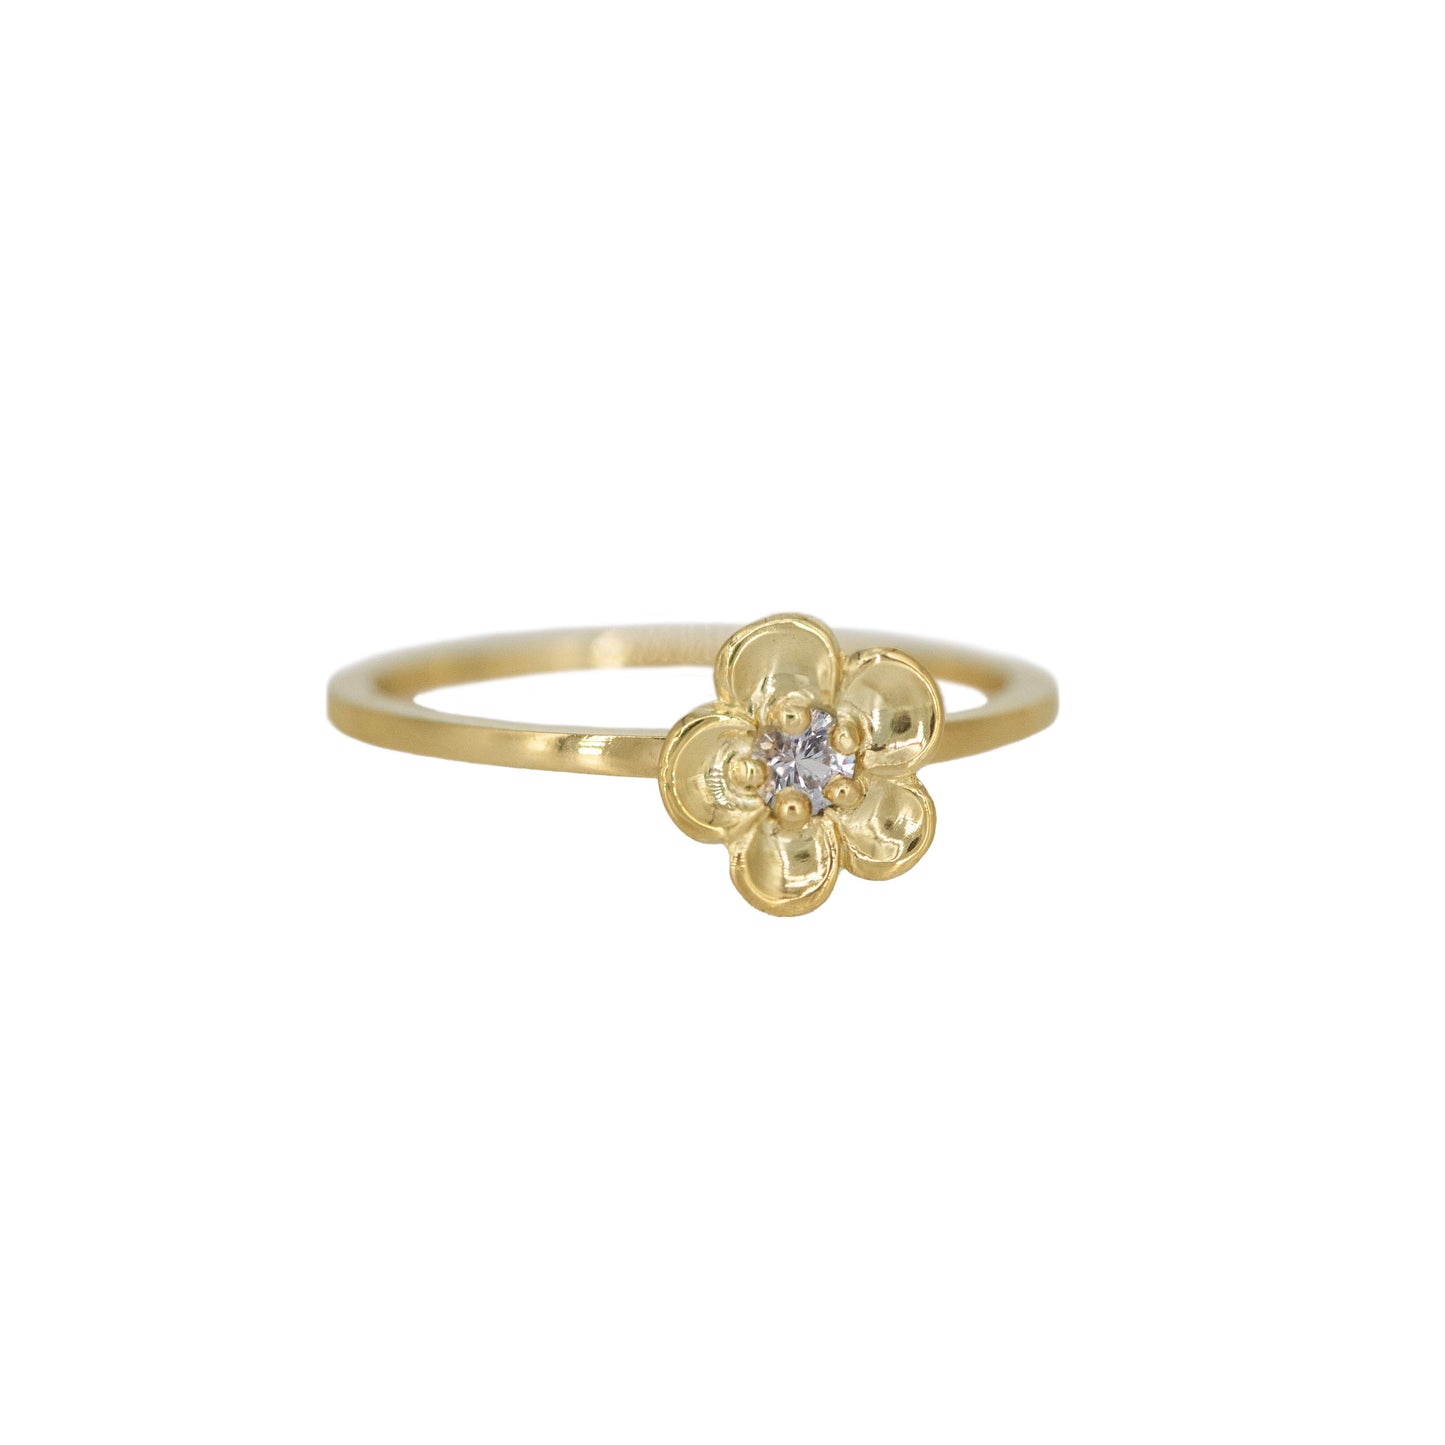 Buttercup Ring - gold, sapphire